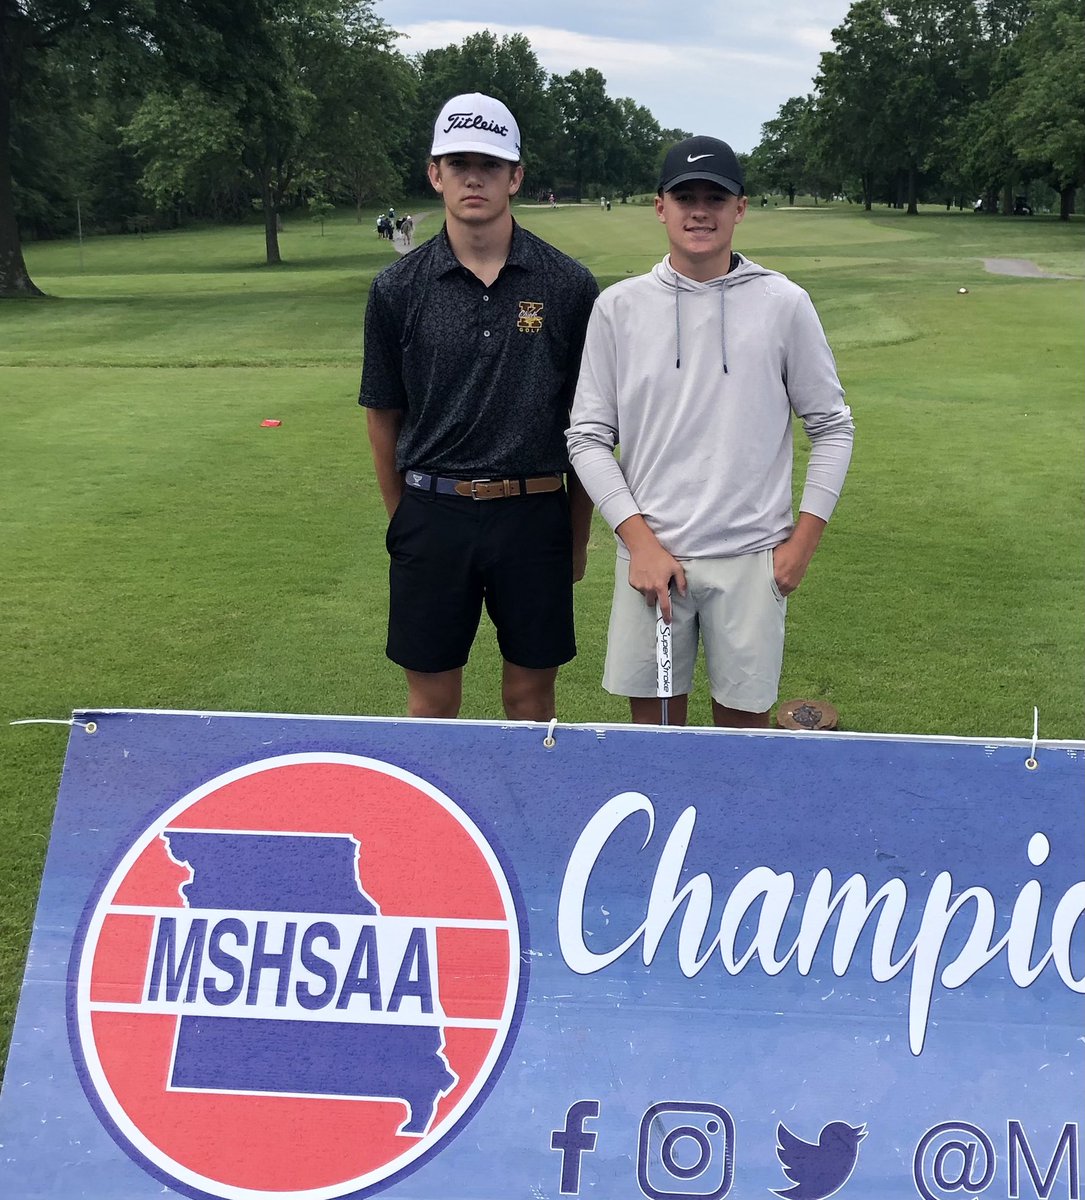 The Chiefs have completed 9-holes at the state championships. You can follow their progress on the MSHSAA website with live scoring. Every three holes their scores are updated.